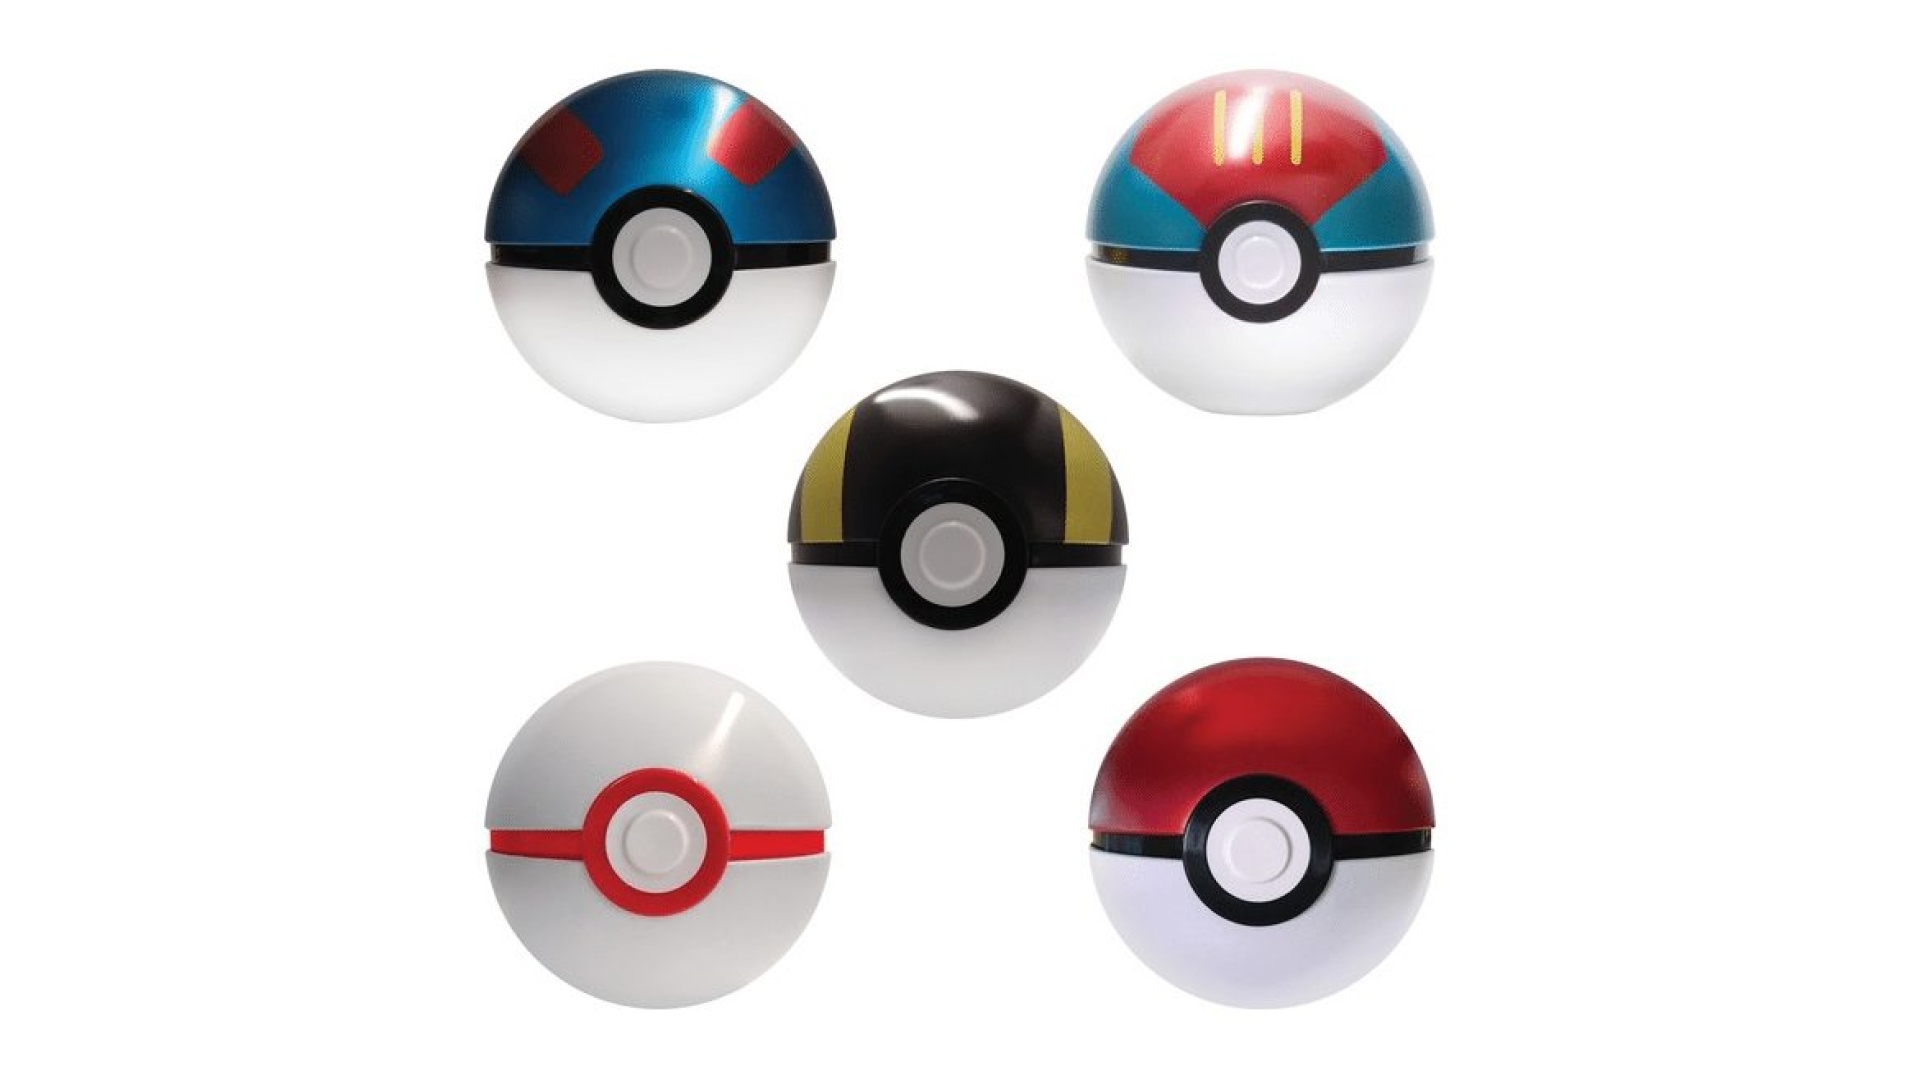 Pokémon Poké Ball Series 8 collectible cards, featuring iconic designs capturing the essence of the 1996 cards.